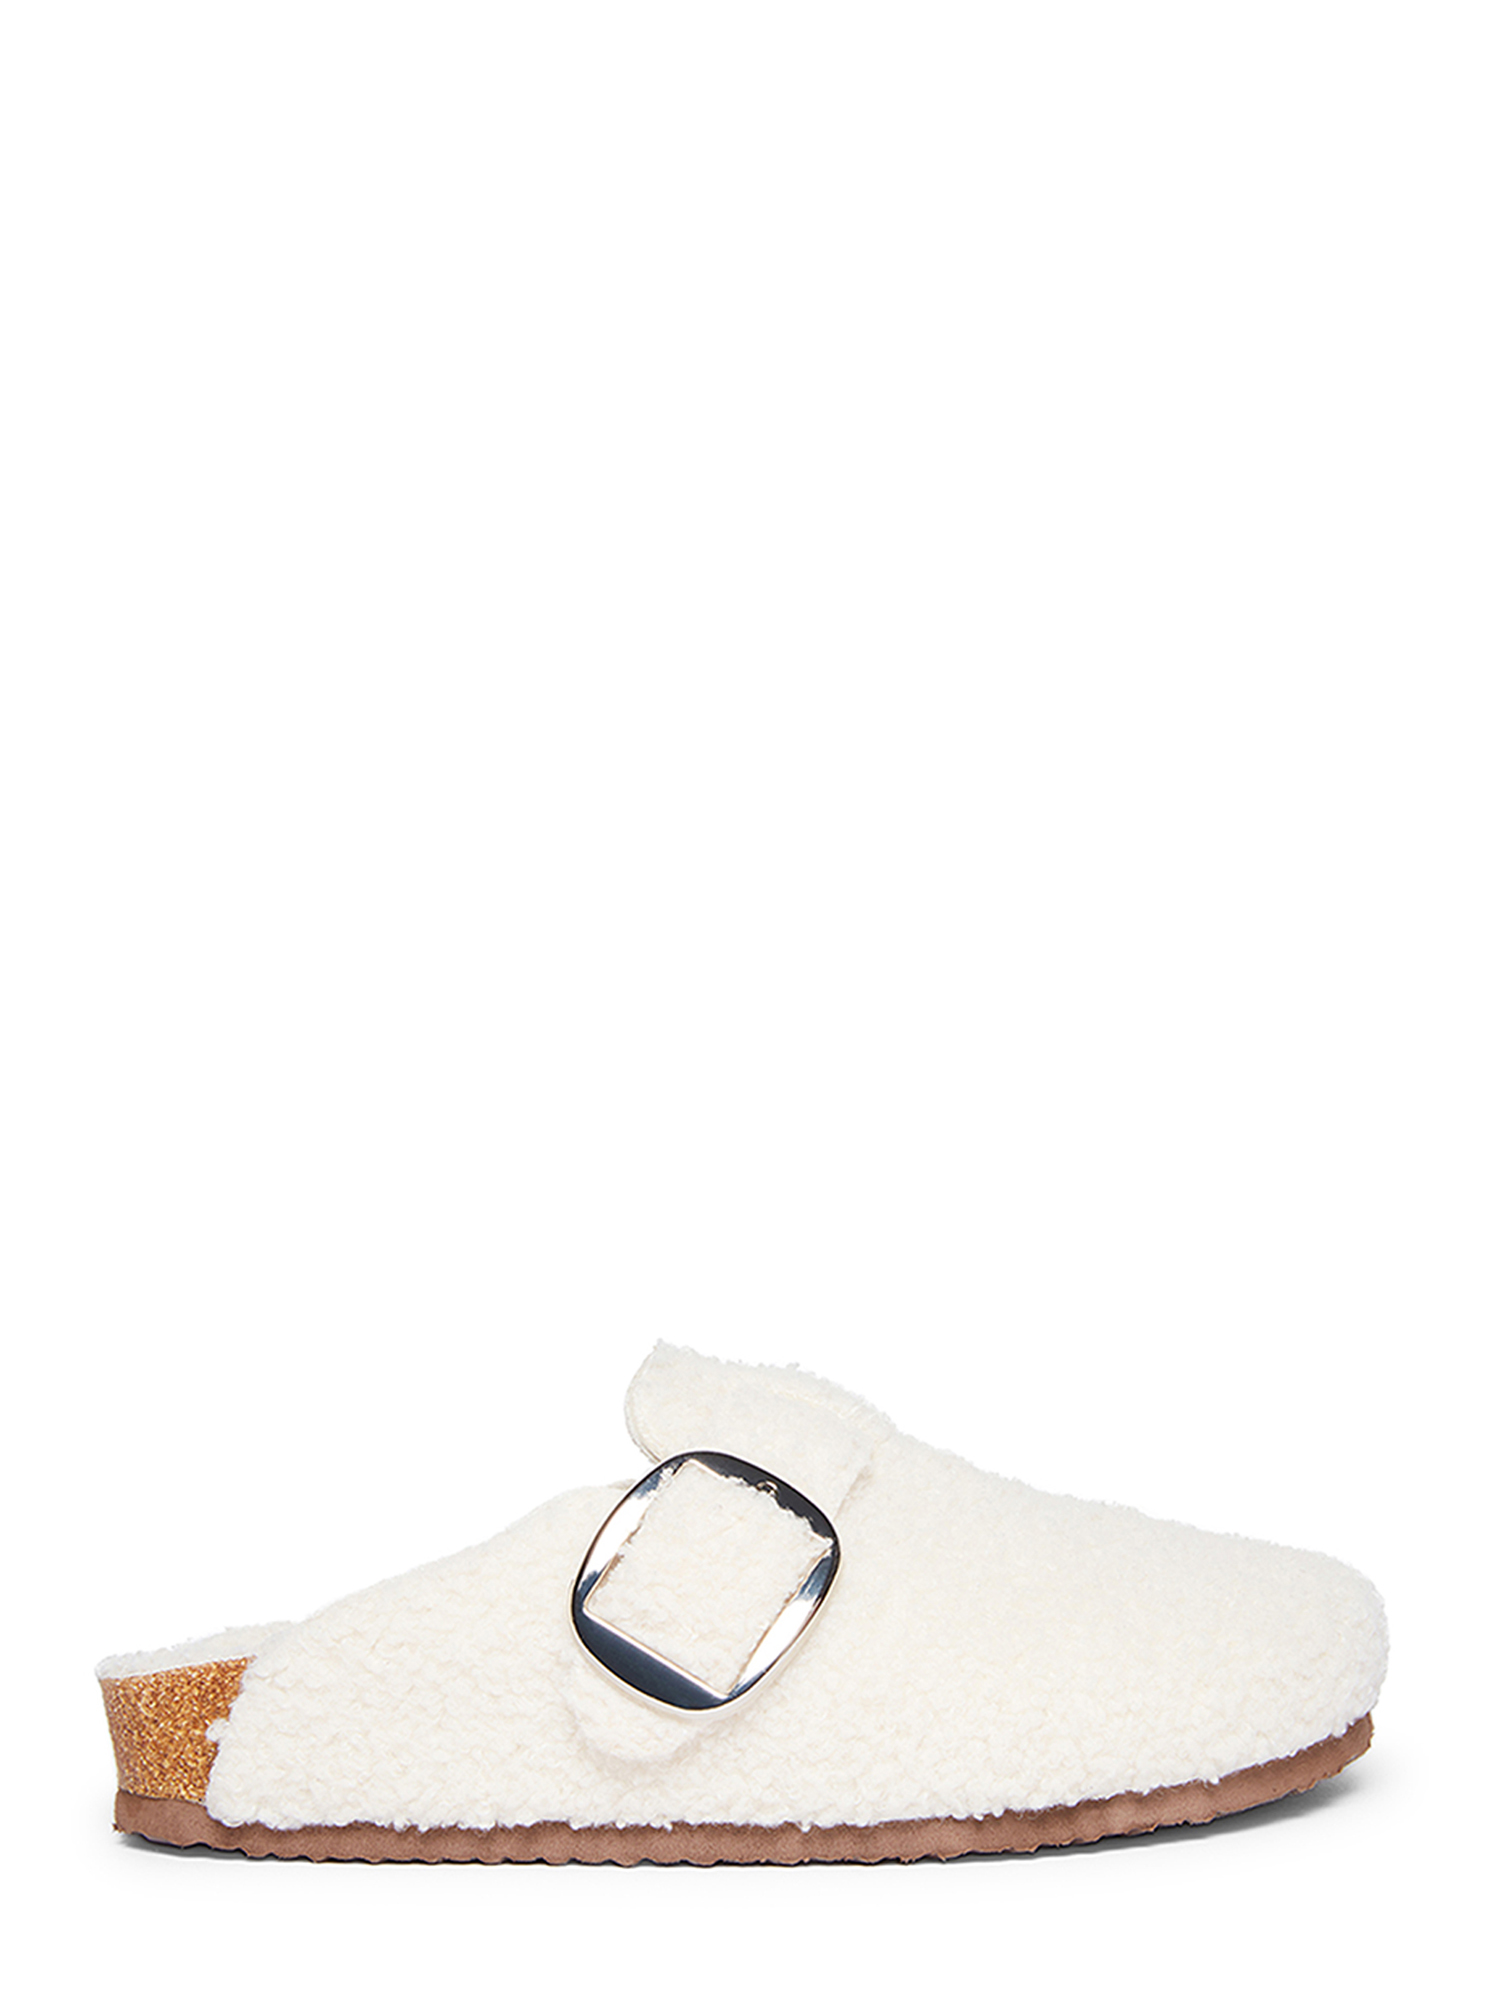 Madden Girl Women's Peony Faux Sherpa Clog - image 2 of 4